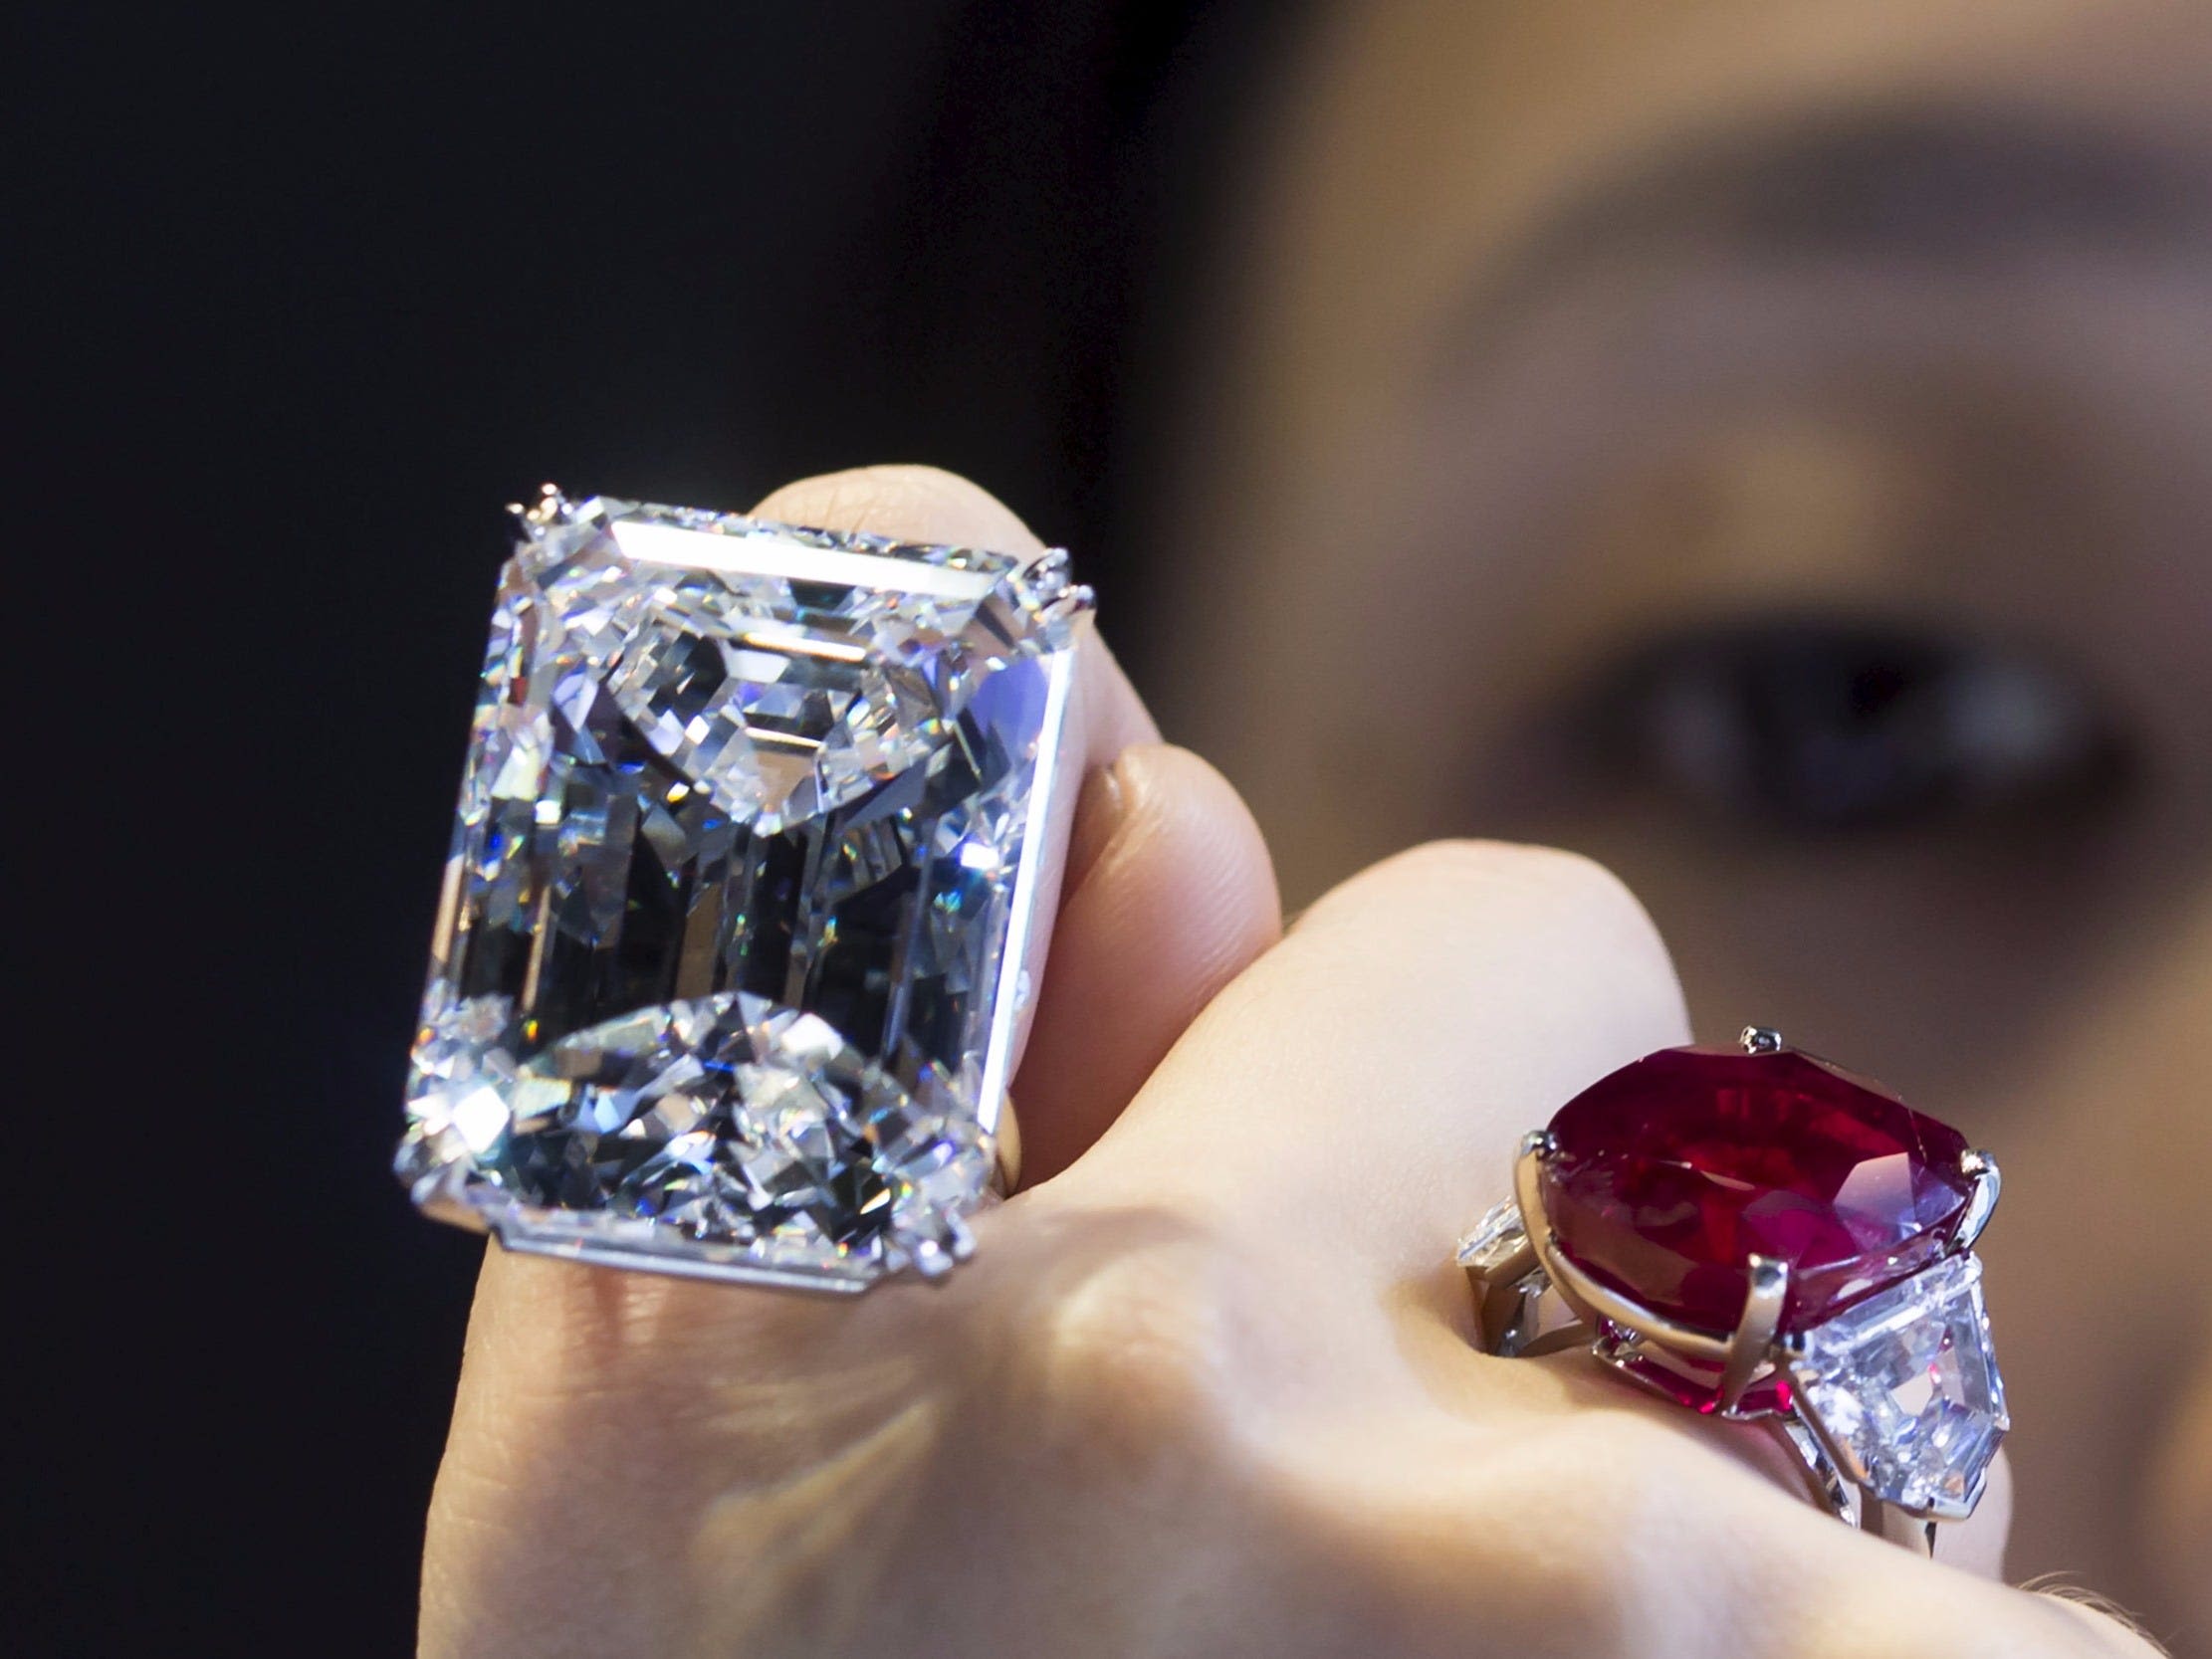 The US is reportedly rethinking plans to ban Russian diamonds amid industry pushback